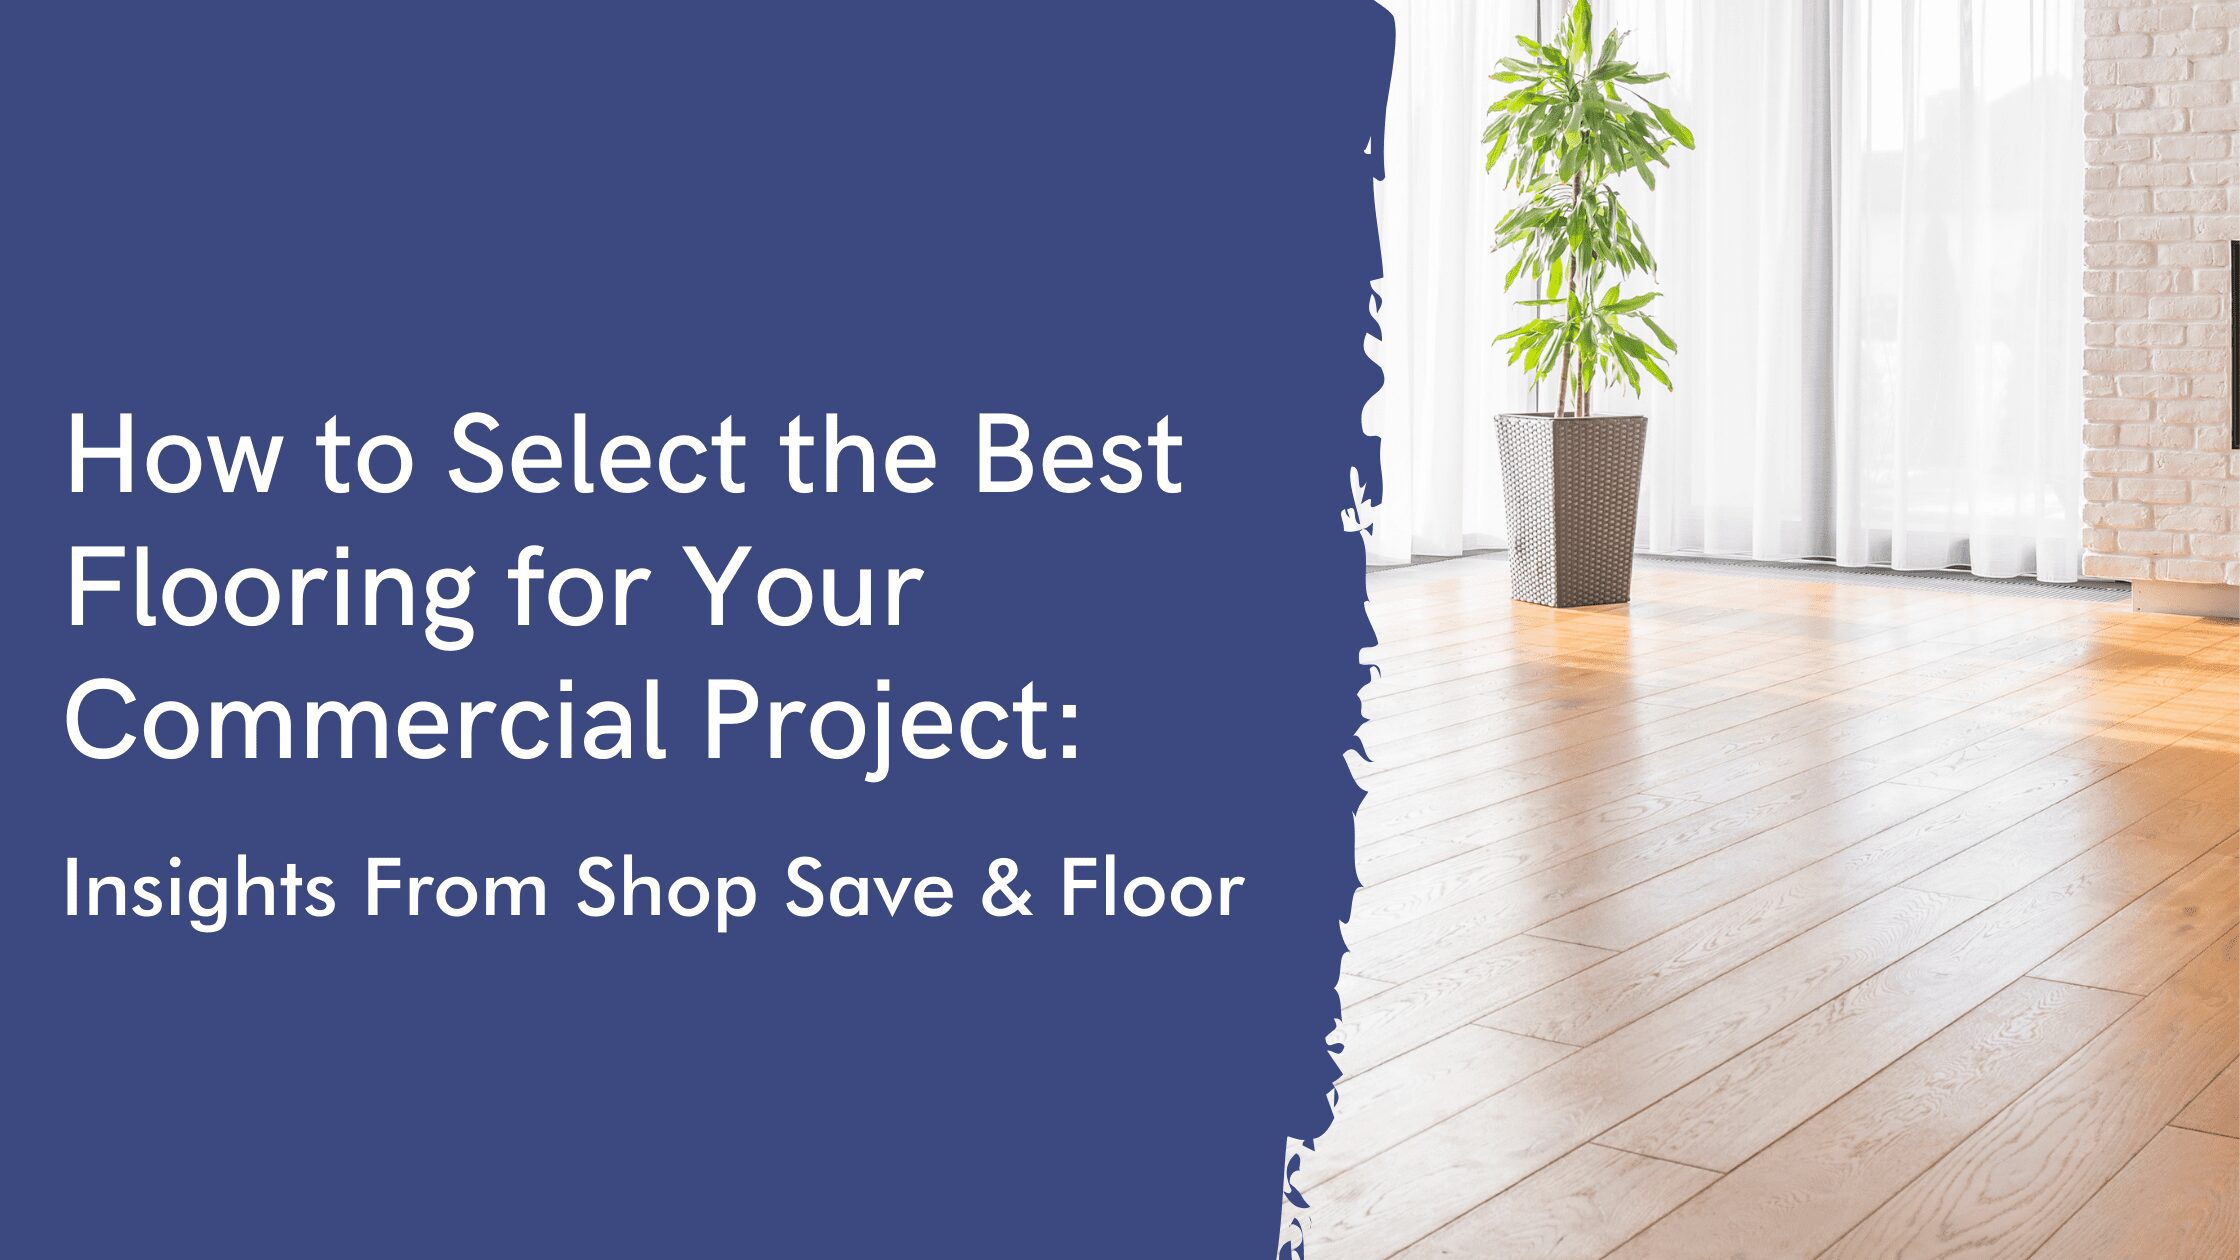 How to Select the Best Flooring for Your Commercial Project: Insights From Shop Save & Floor